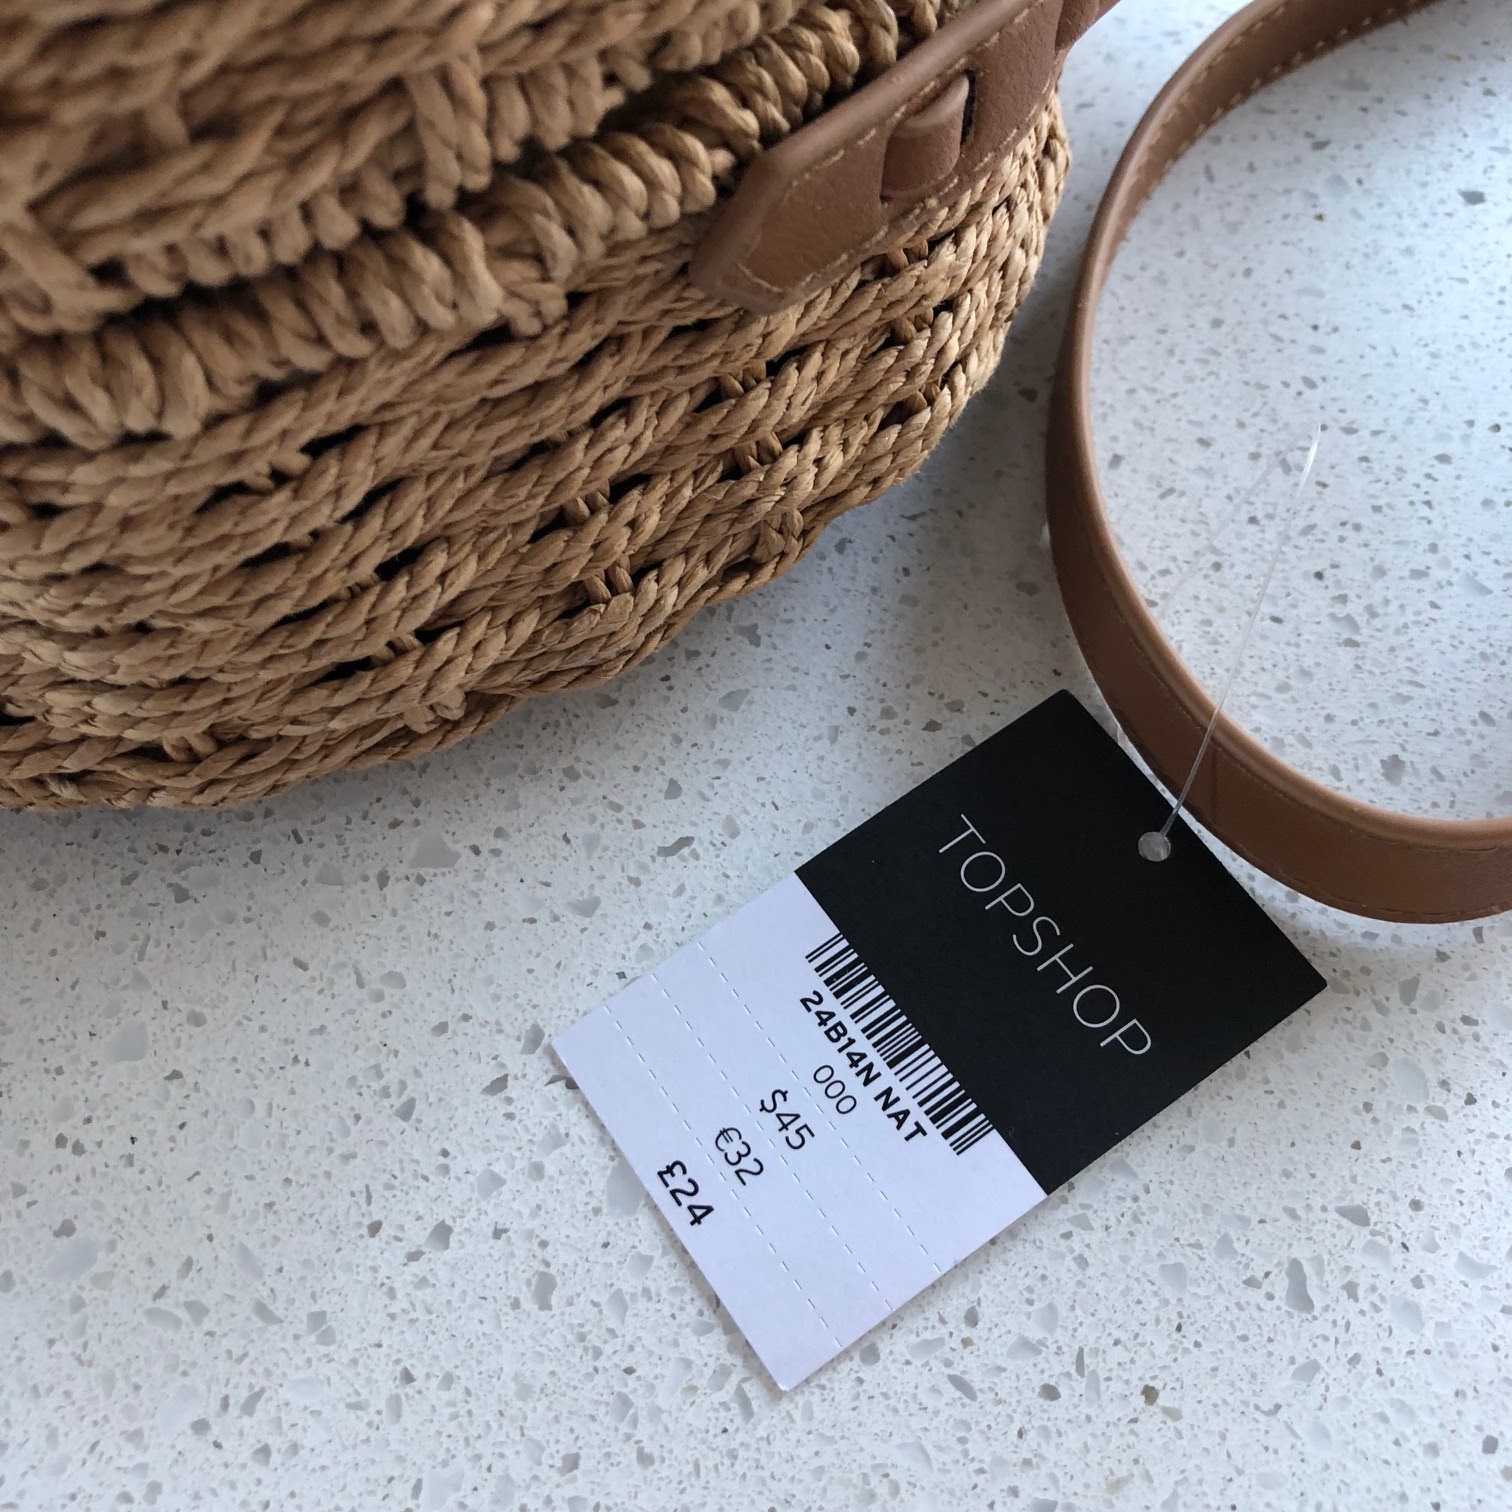 The Bargain Woven Circle Bag from Topshop | A Life To Style